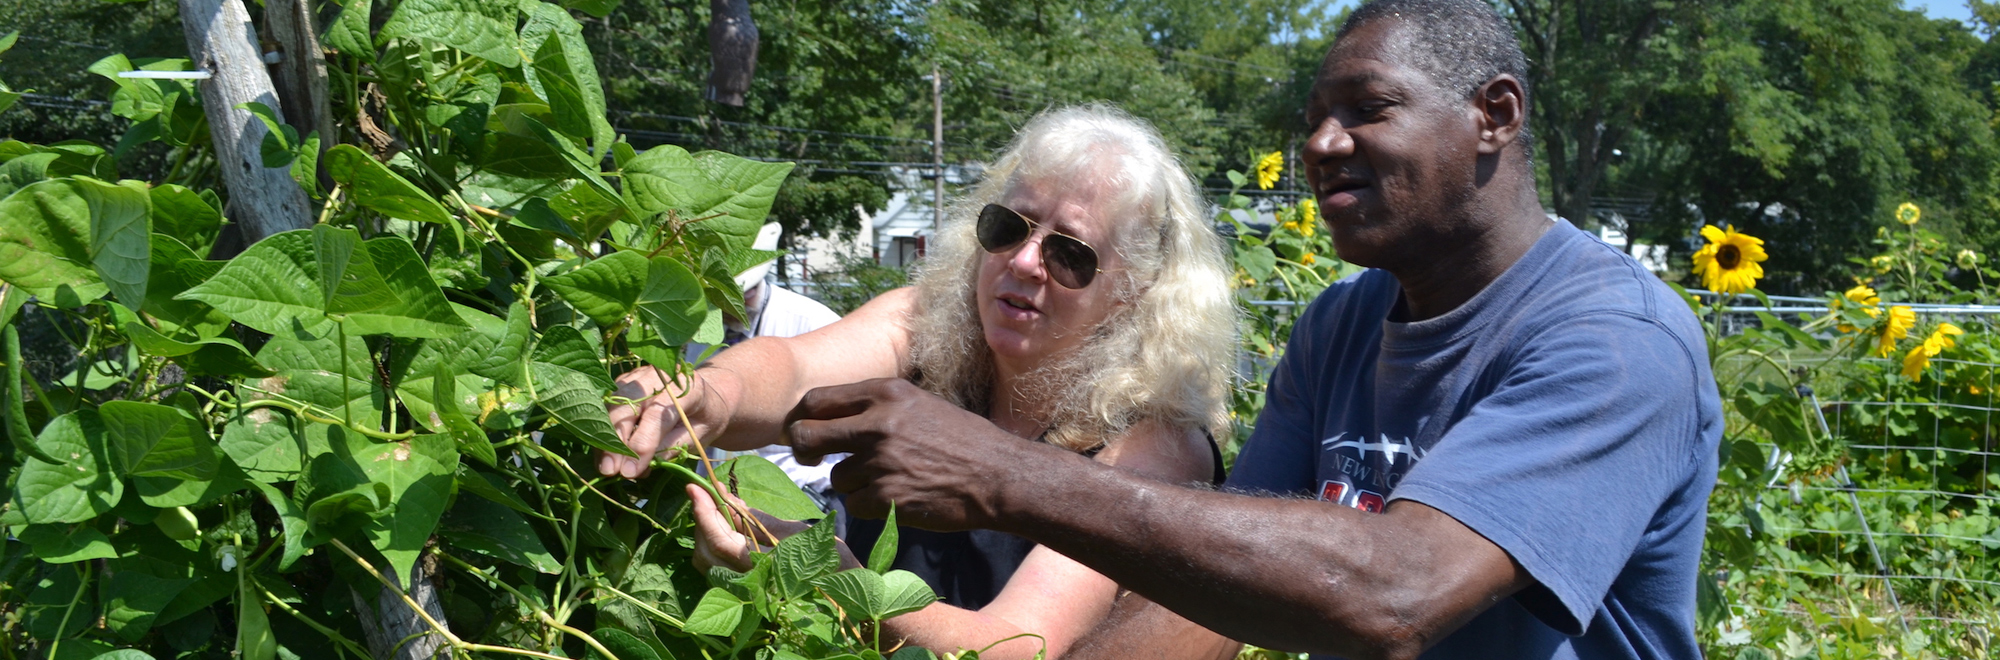 Sarah Bailey and volunteer at the Burgdorf garden in Hartford